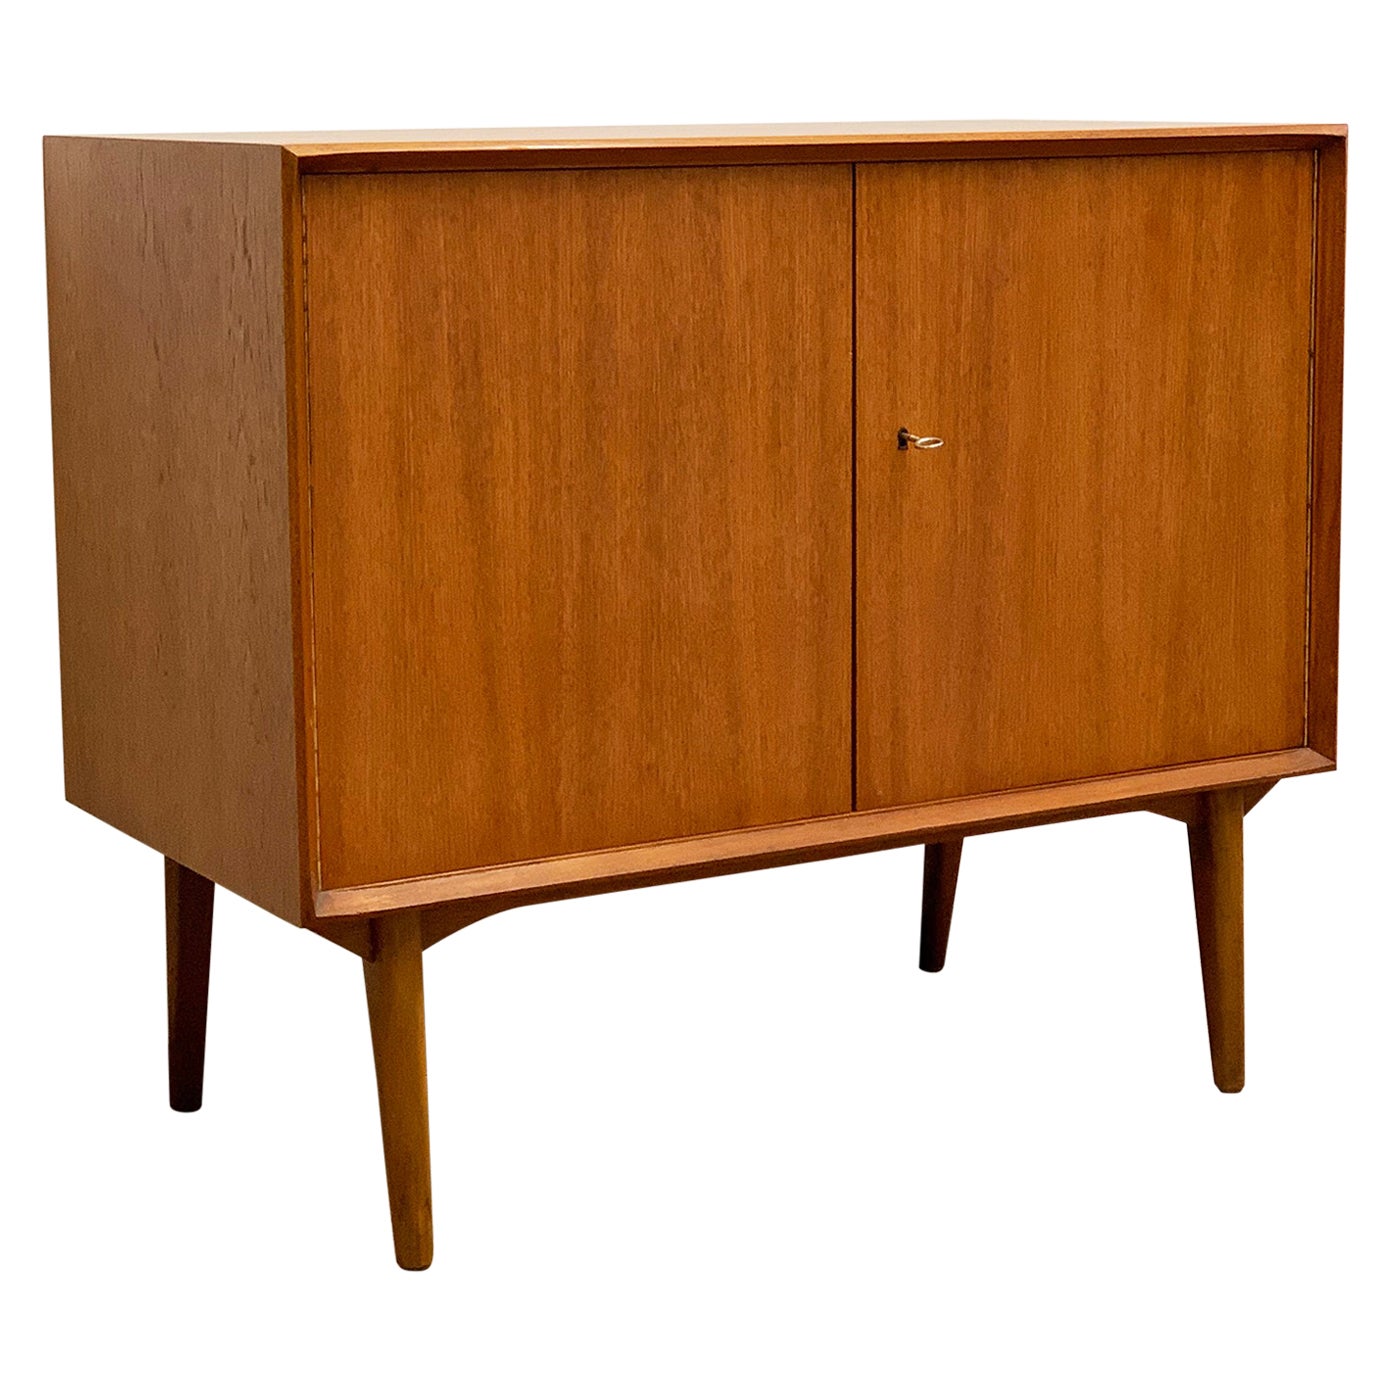 Small Mid-Century Sideboard in Teak by Rex Raab for Wilhelm Renz, Germany, 1960s For Sale